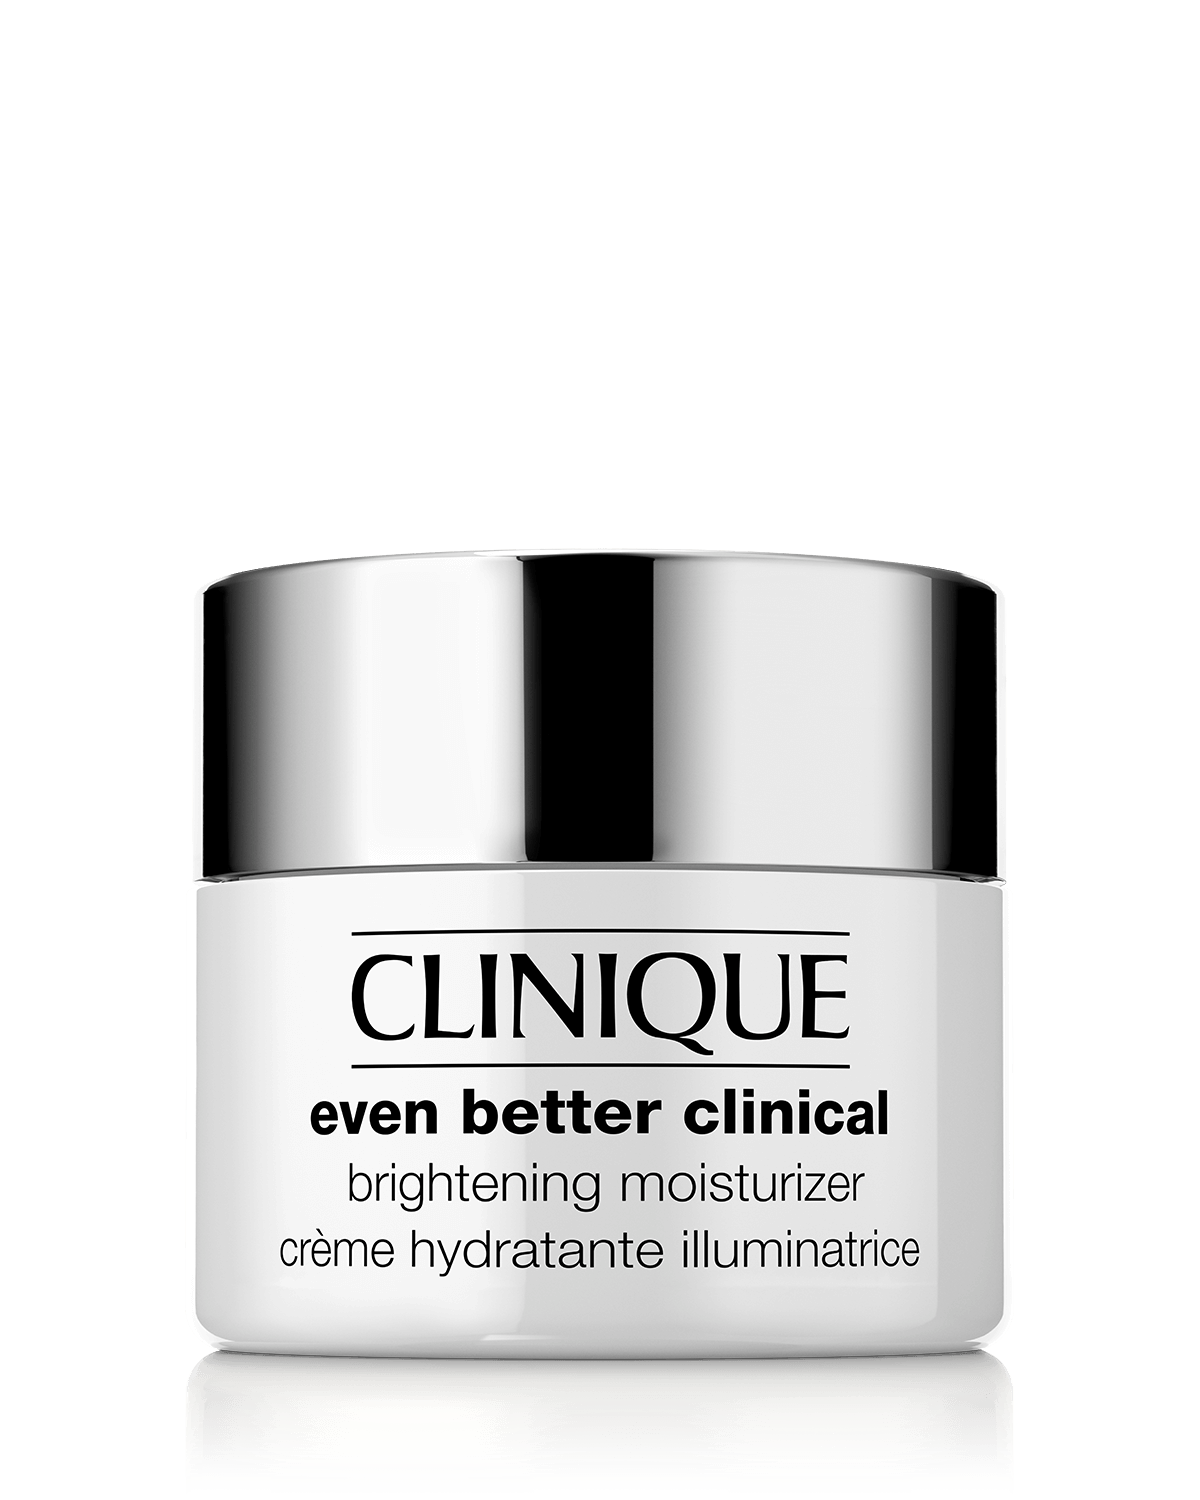 NEW Even Better Clinical™ Clinique